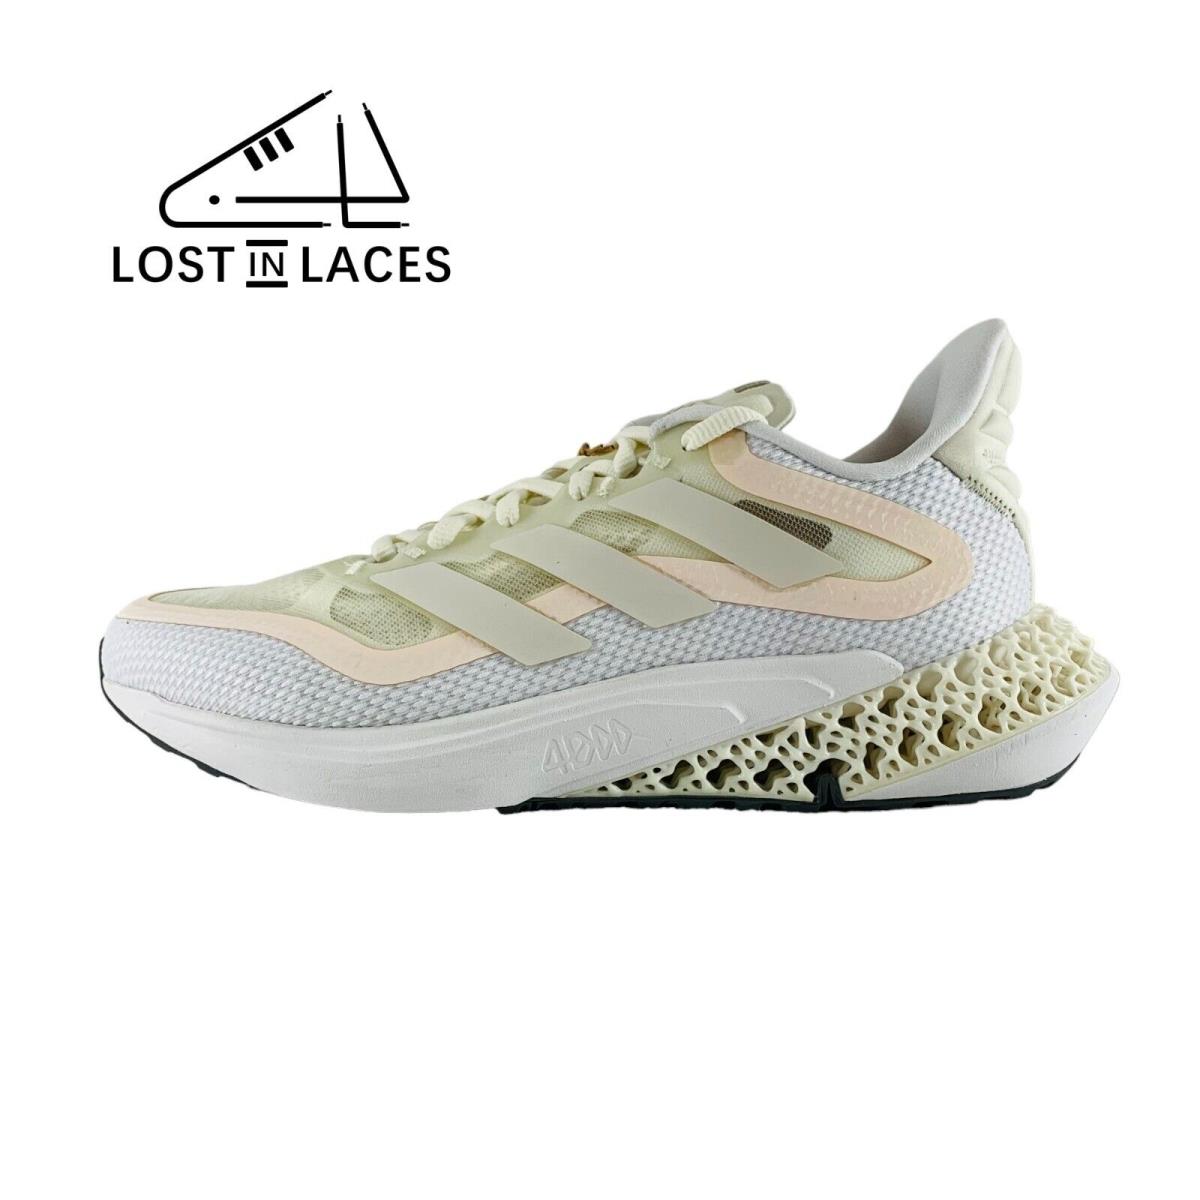 Adidas 4DFWD Pulse 2 Off White Sneakers Running Shoes GY1647 Women`s Sizes